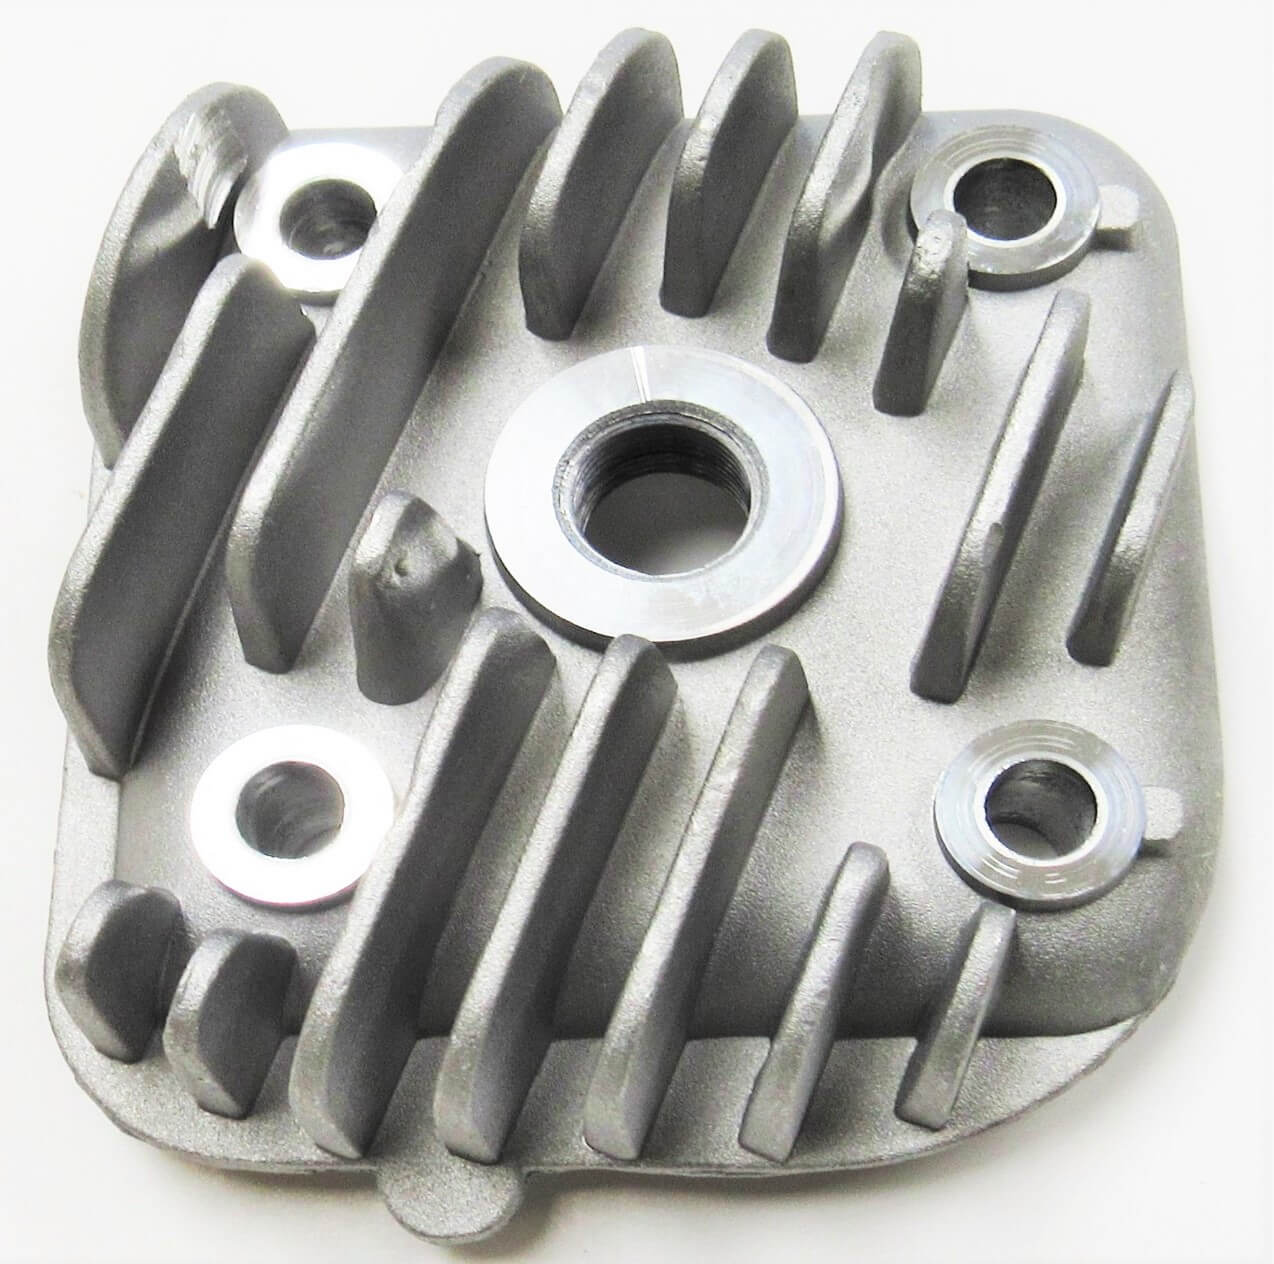 Cylinder Head 47mm E-Ton Viper RXL70cc Fits Most 2 Stroke ATVs and Scooters - Click Image to Close